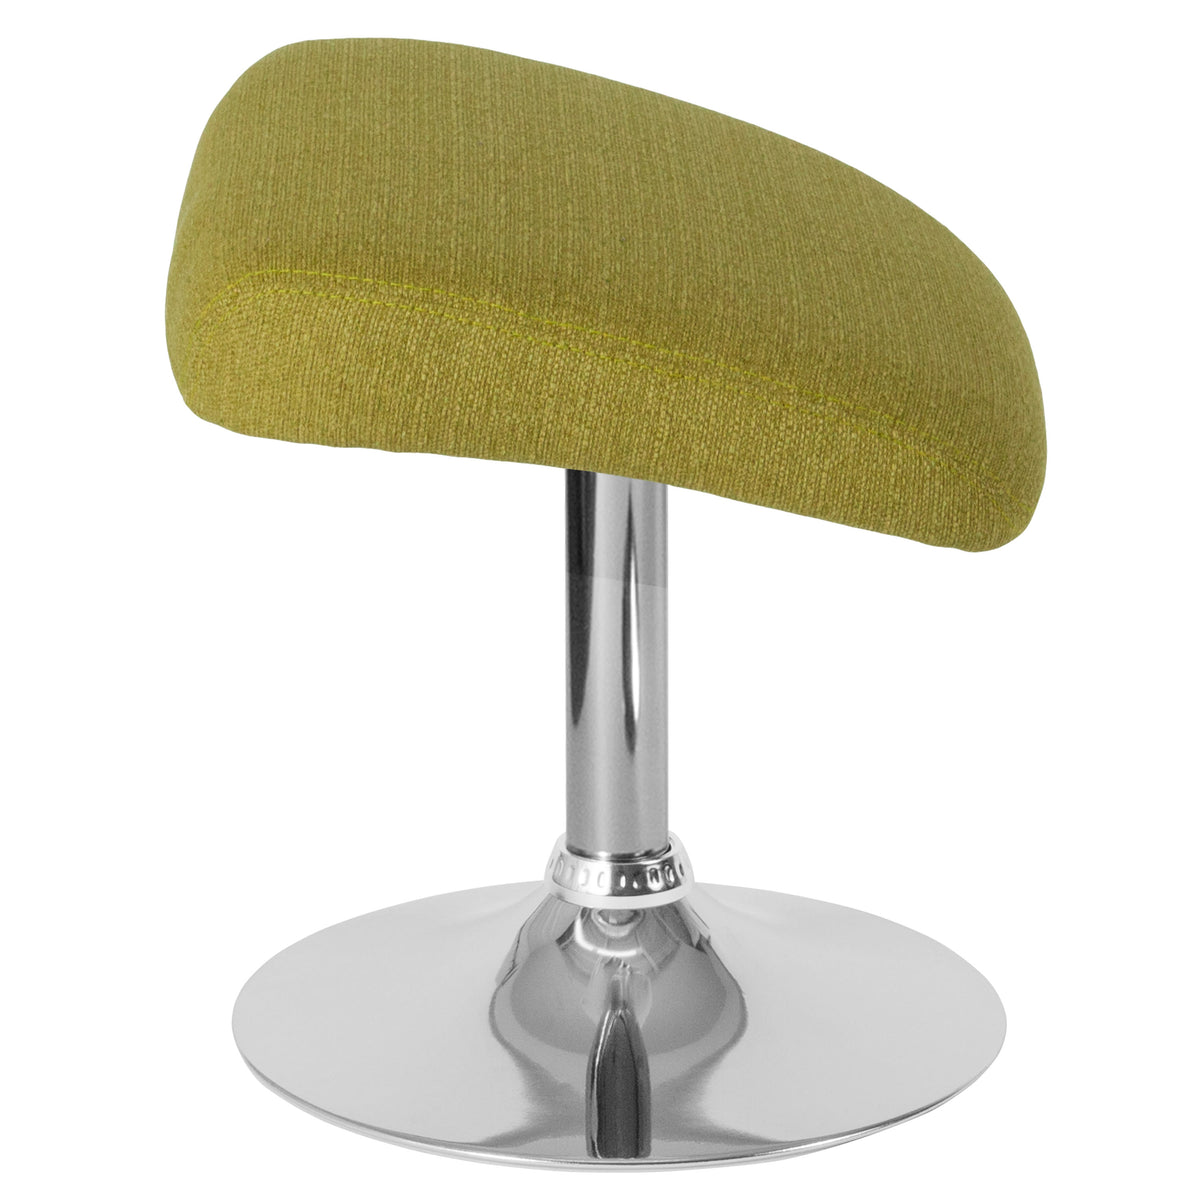 Green Fabric |#| Green Fabric Ottoman Footrest with Chrome Base - Living Room Furniture